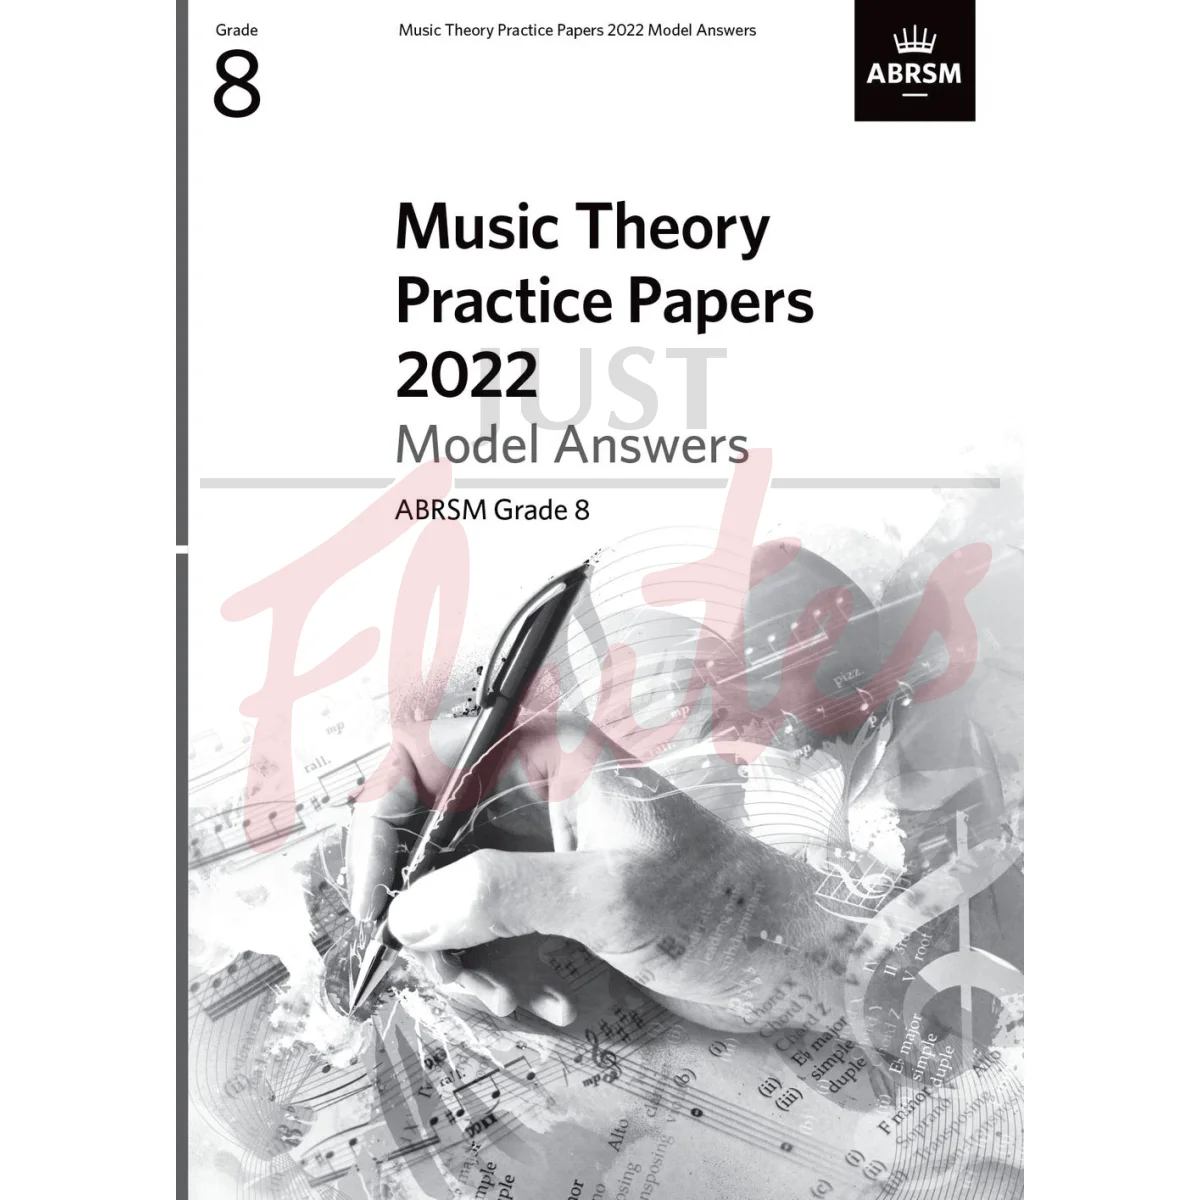 Music Theory Practice Papers 2022 Grade 8 - Model Answers